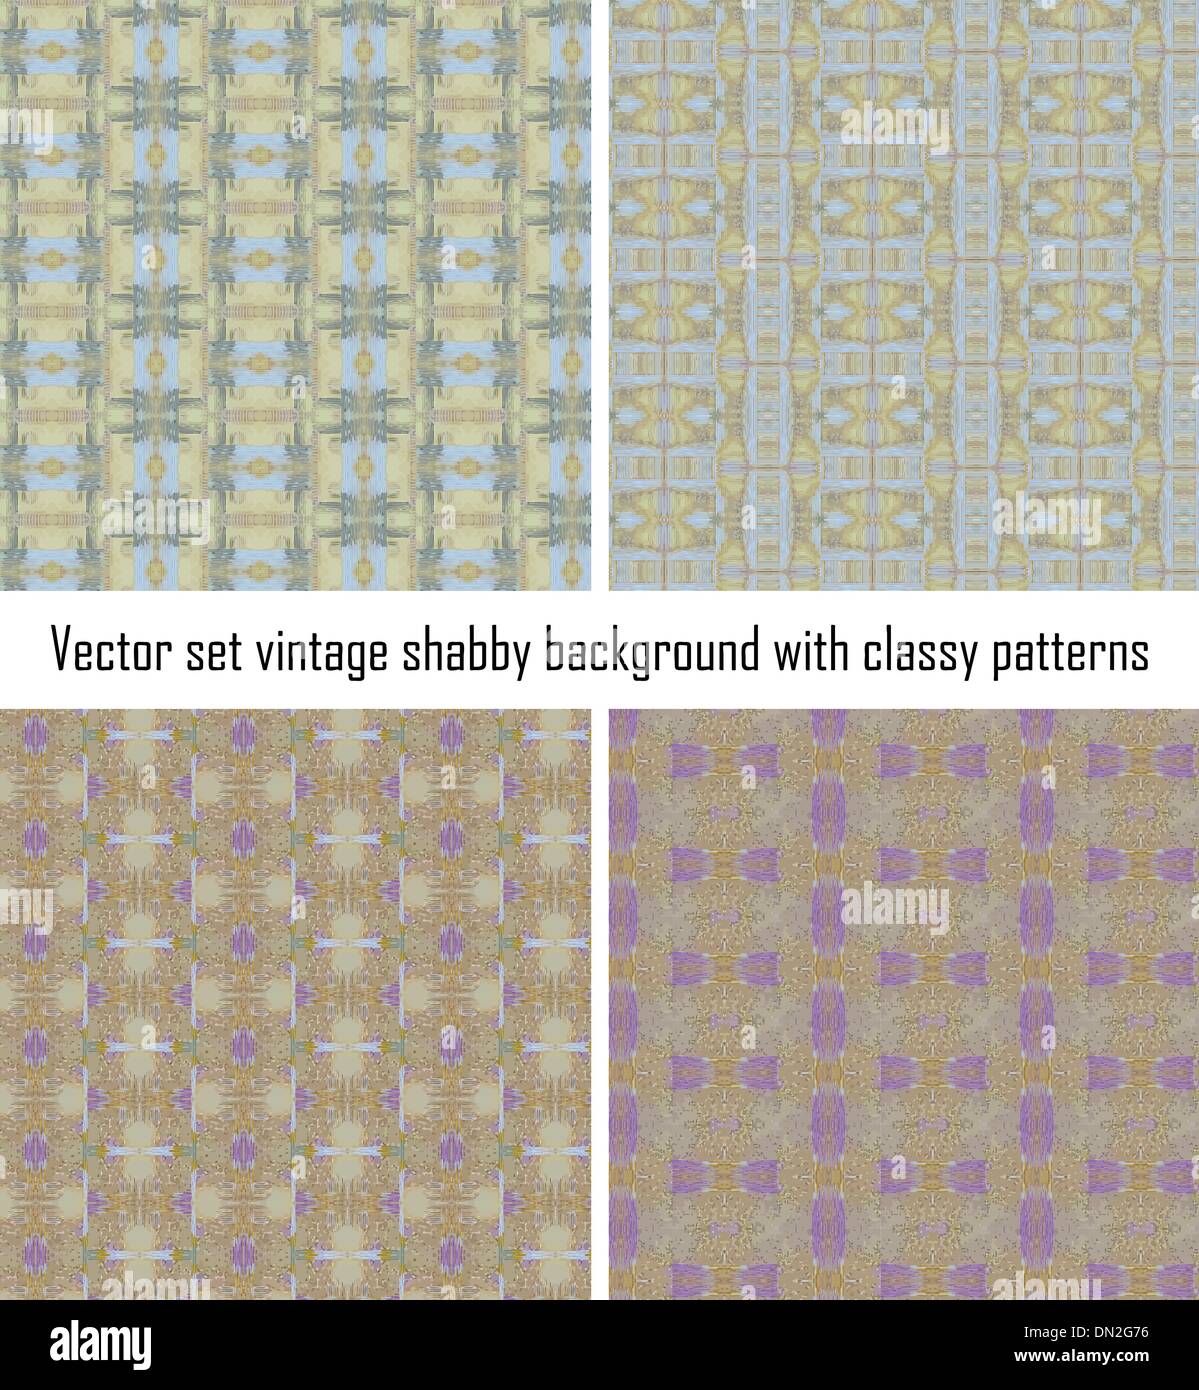 Vector set vintage background classical patterns Stock Vector